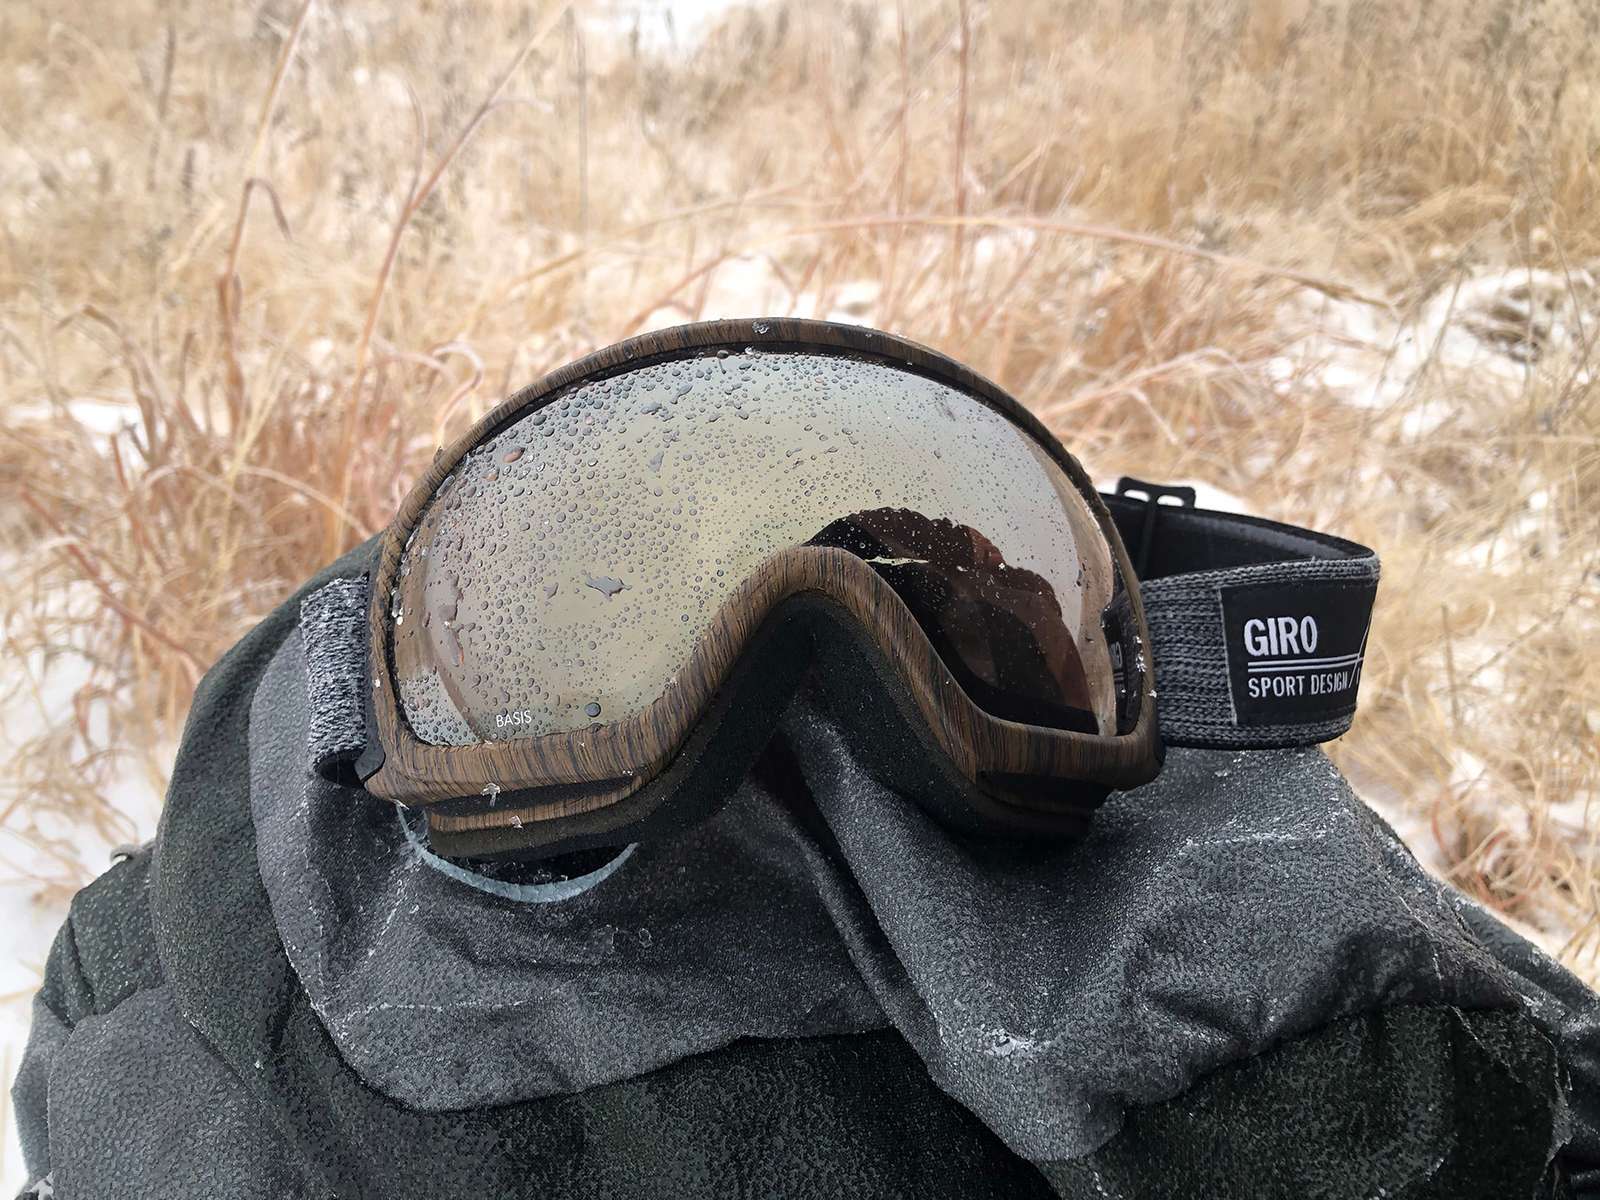 The freezing rain melted on my goggles.